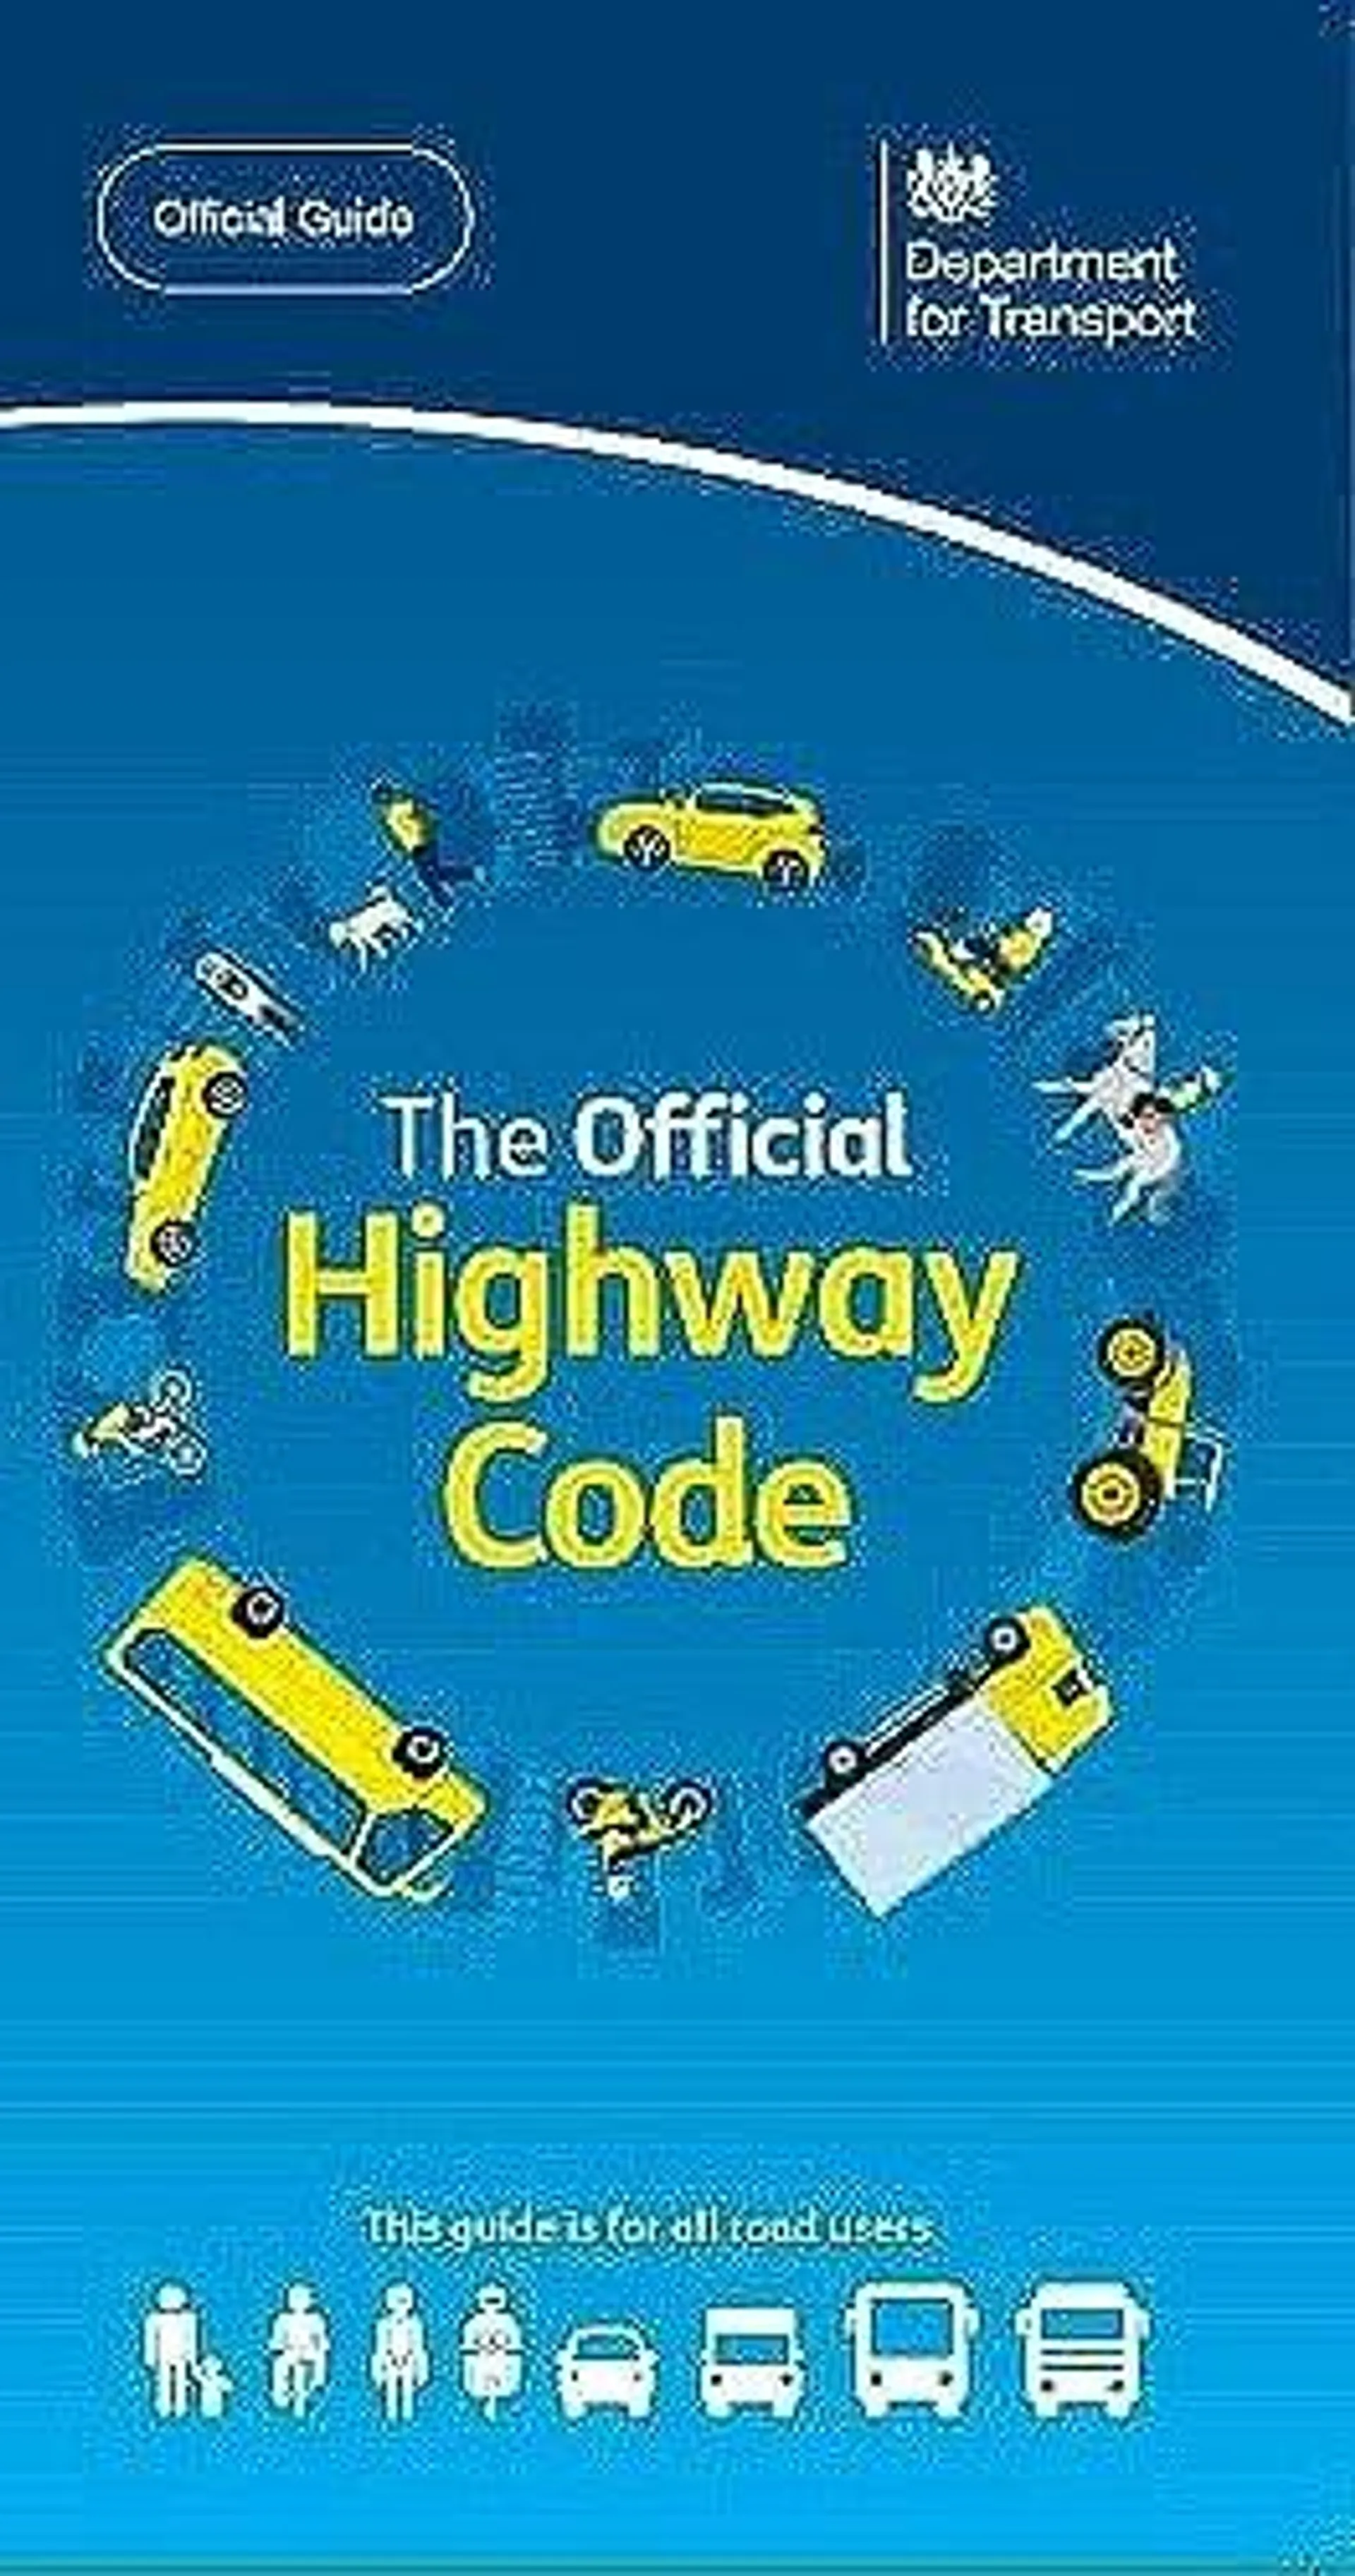 The official highway code by Driver & Vehicle Standards Agency